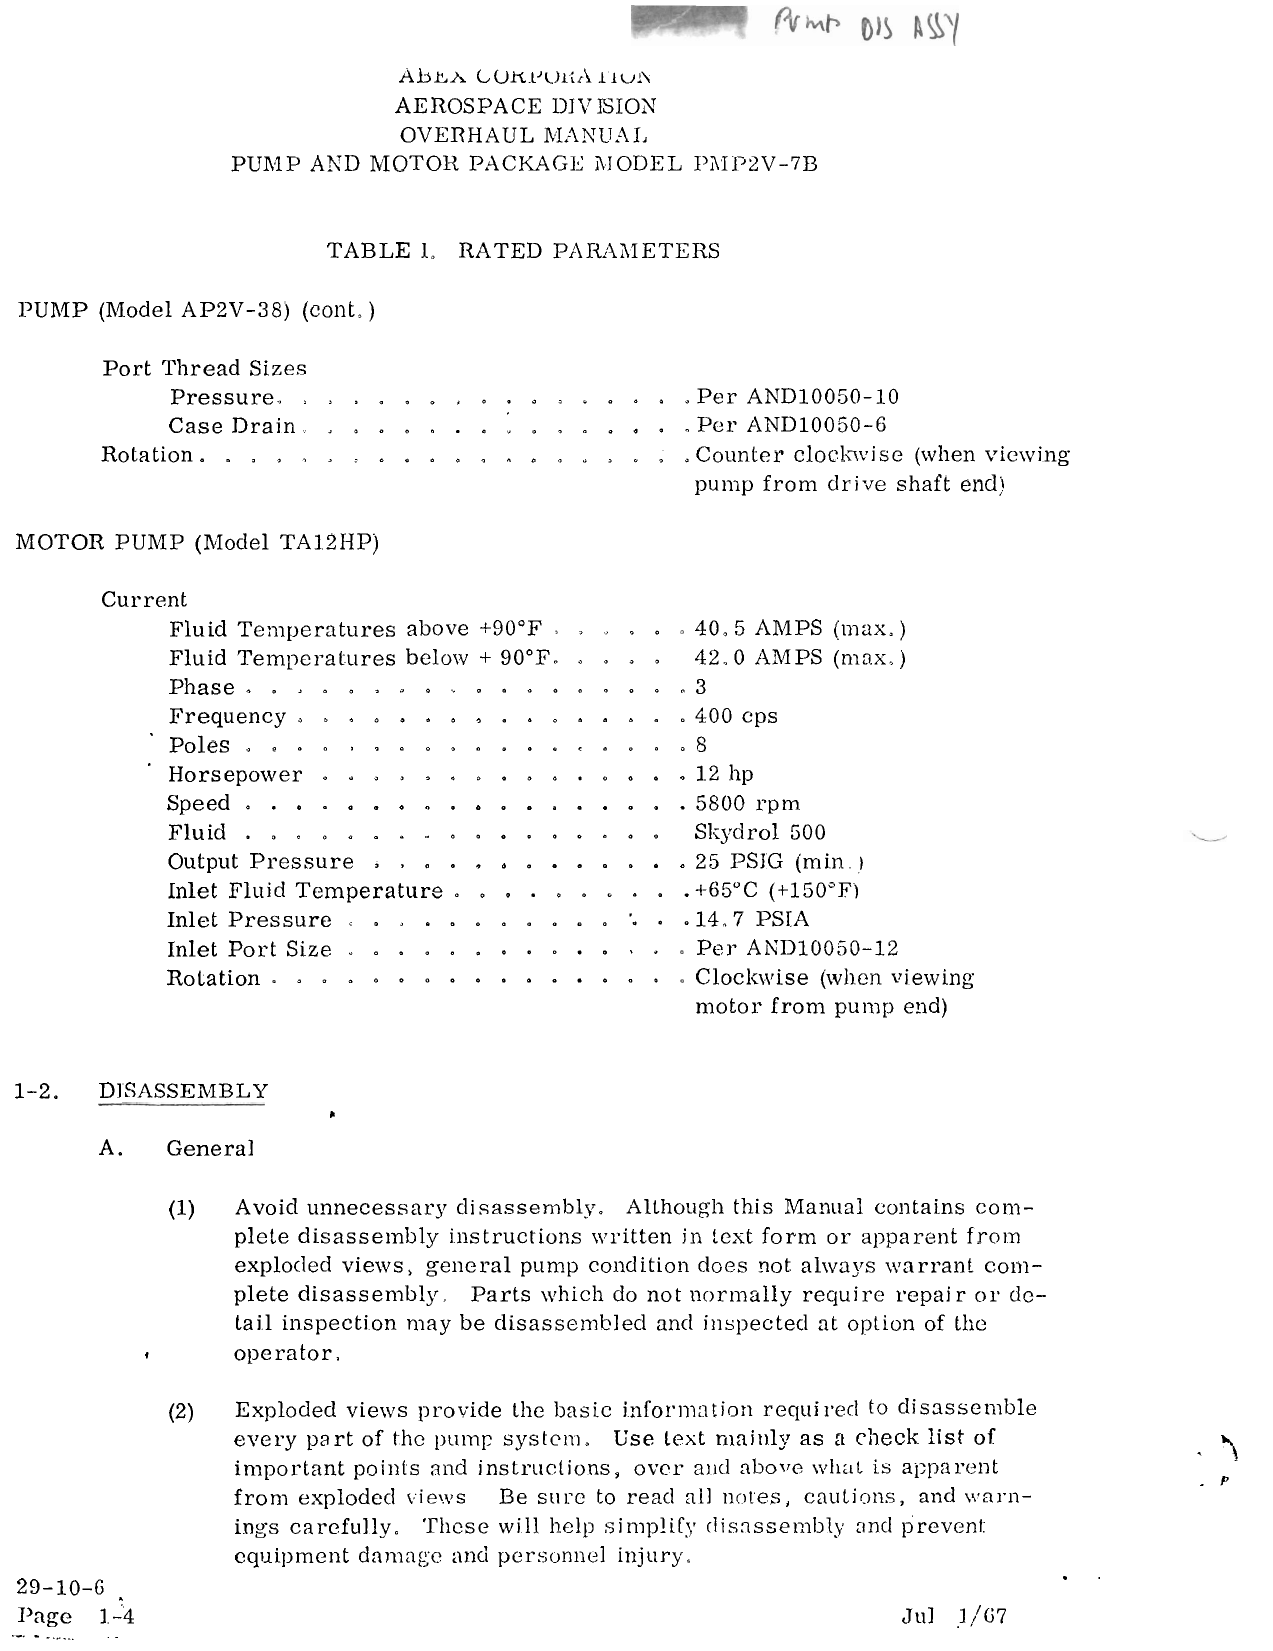 Sample page 5 from AirCorps Library document: Overhaul Manual for Pump and Motor Package - Parts 57097, 57180, and 57186